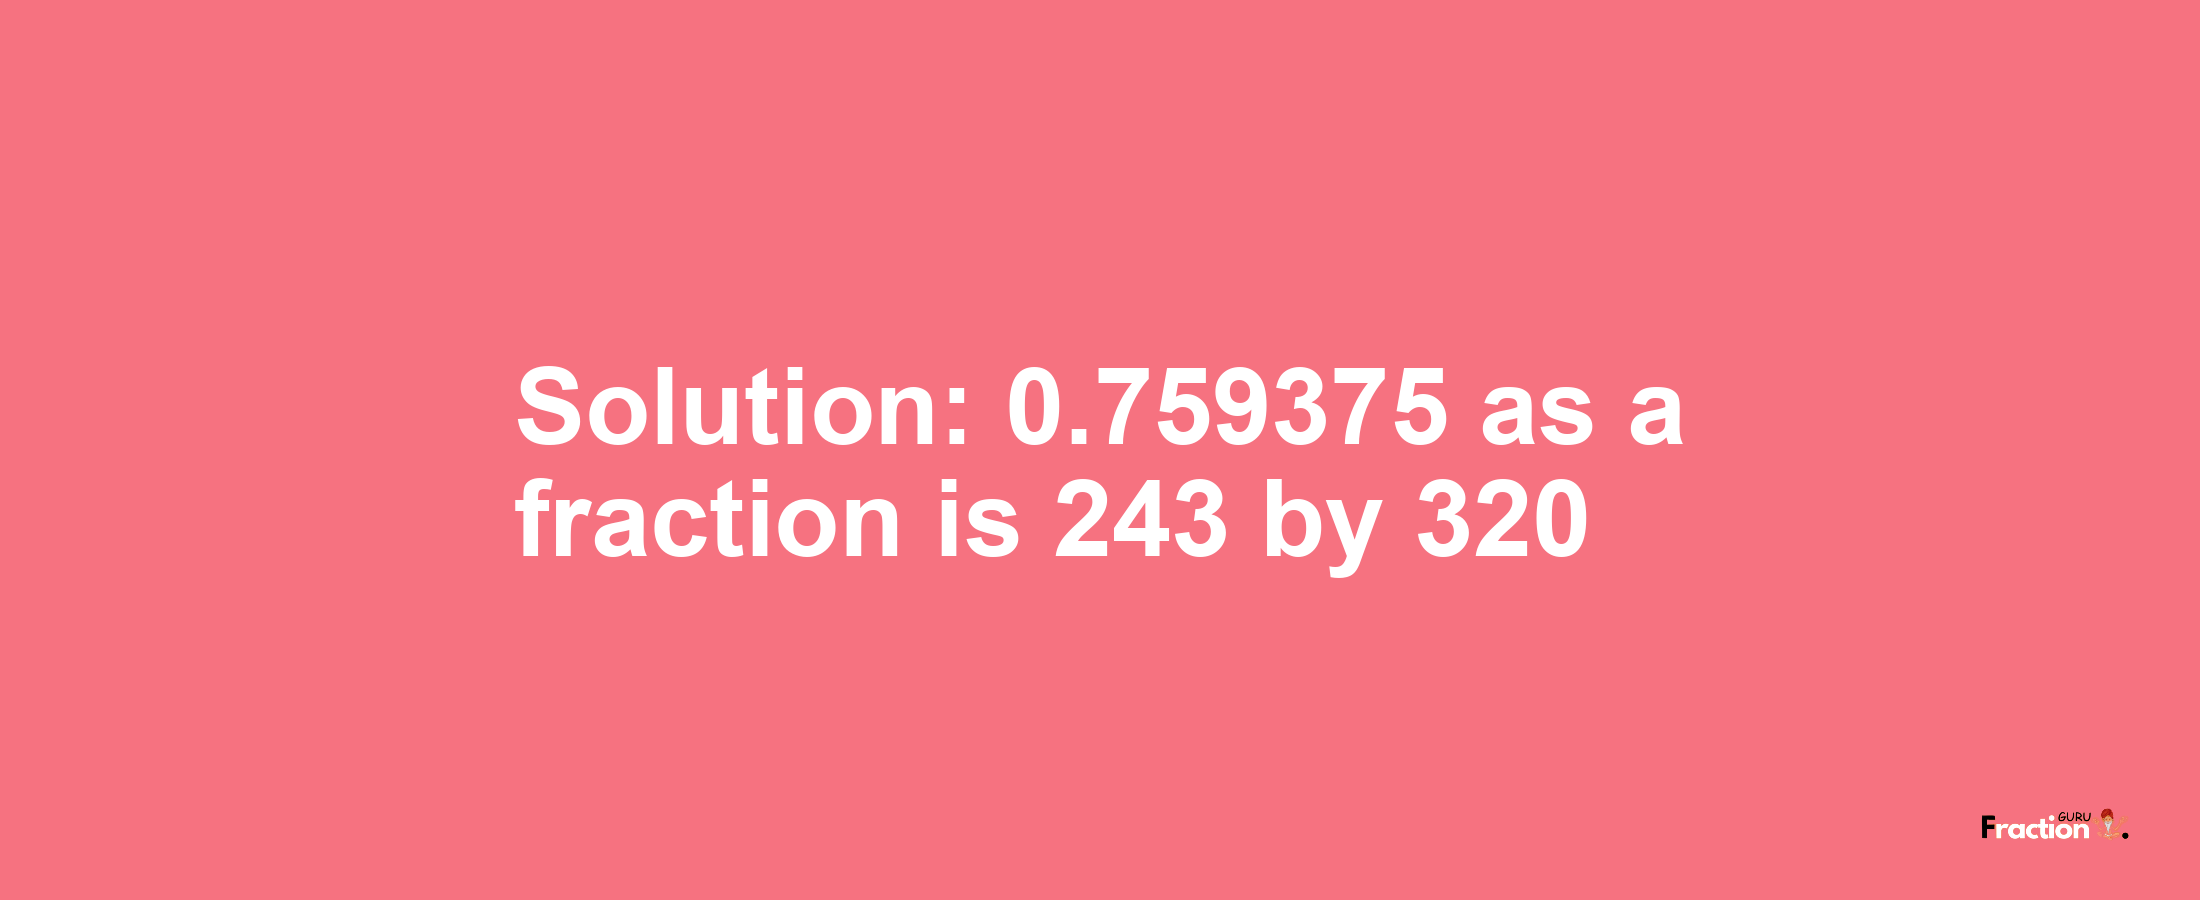 Solution:0.759375 as a fraction is 243/320